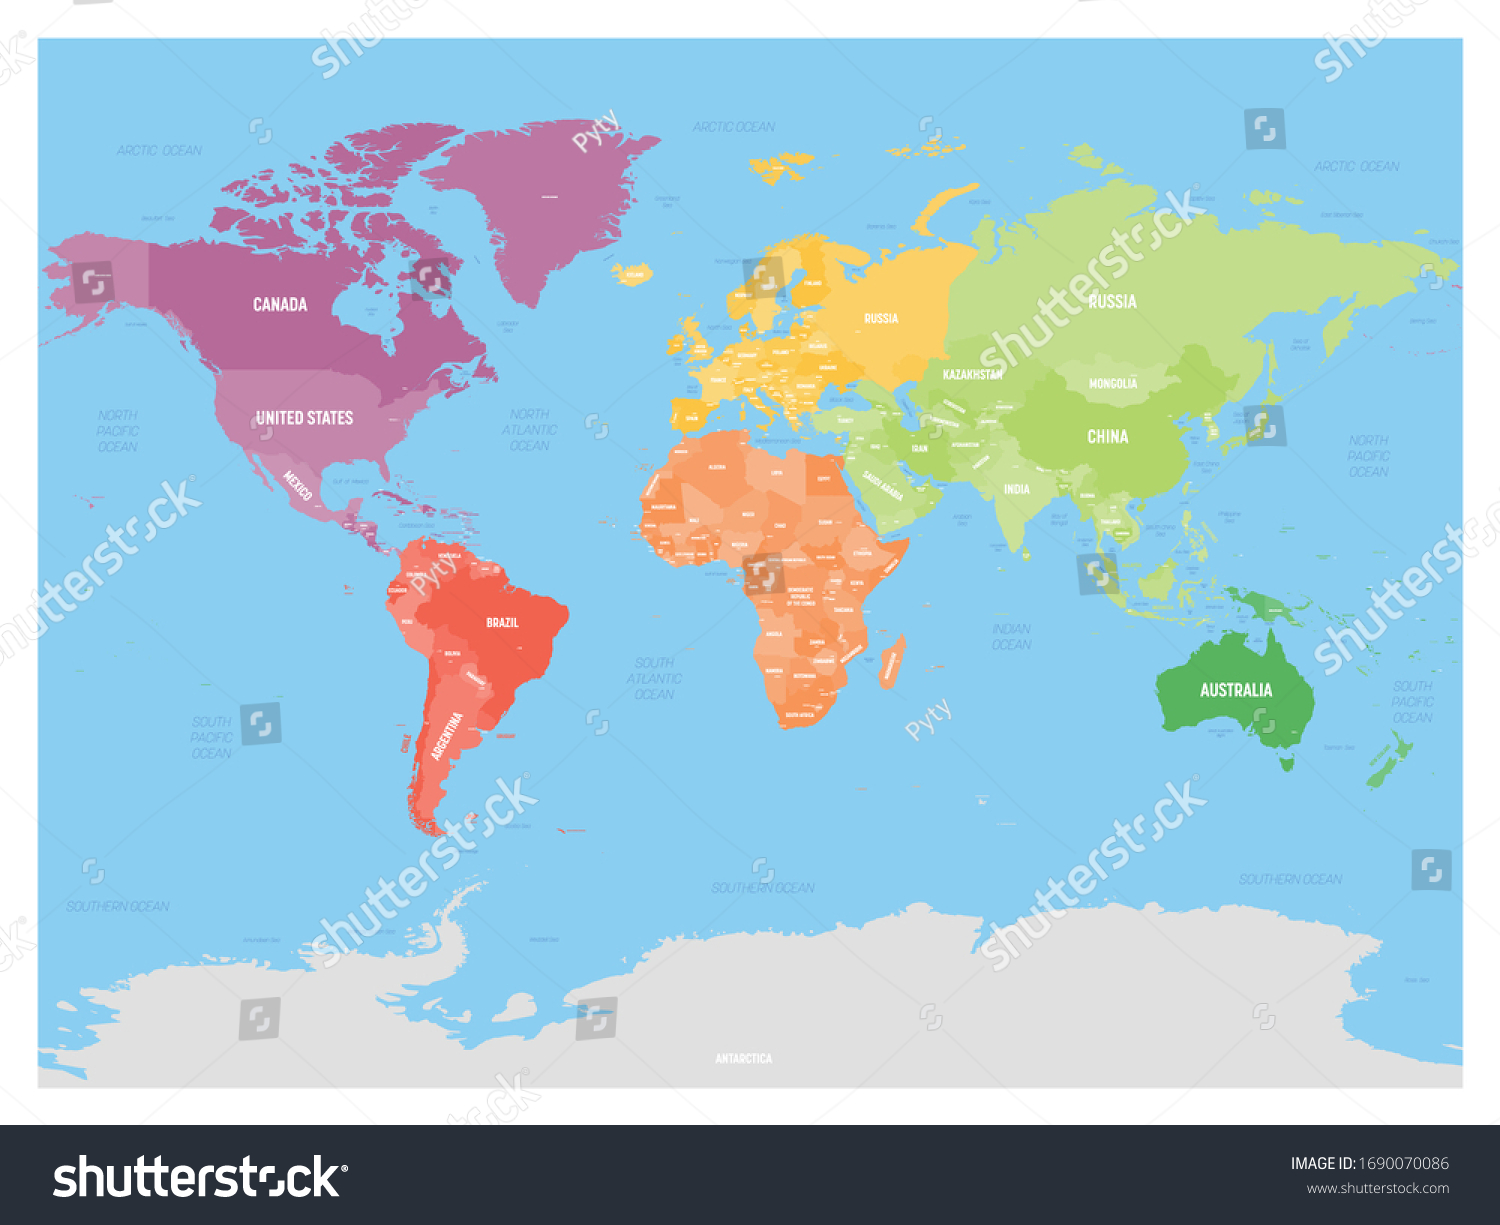 12,351 World map vector with country names Images, Stock Photos ...